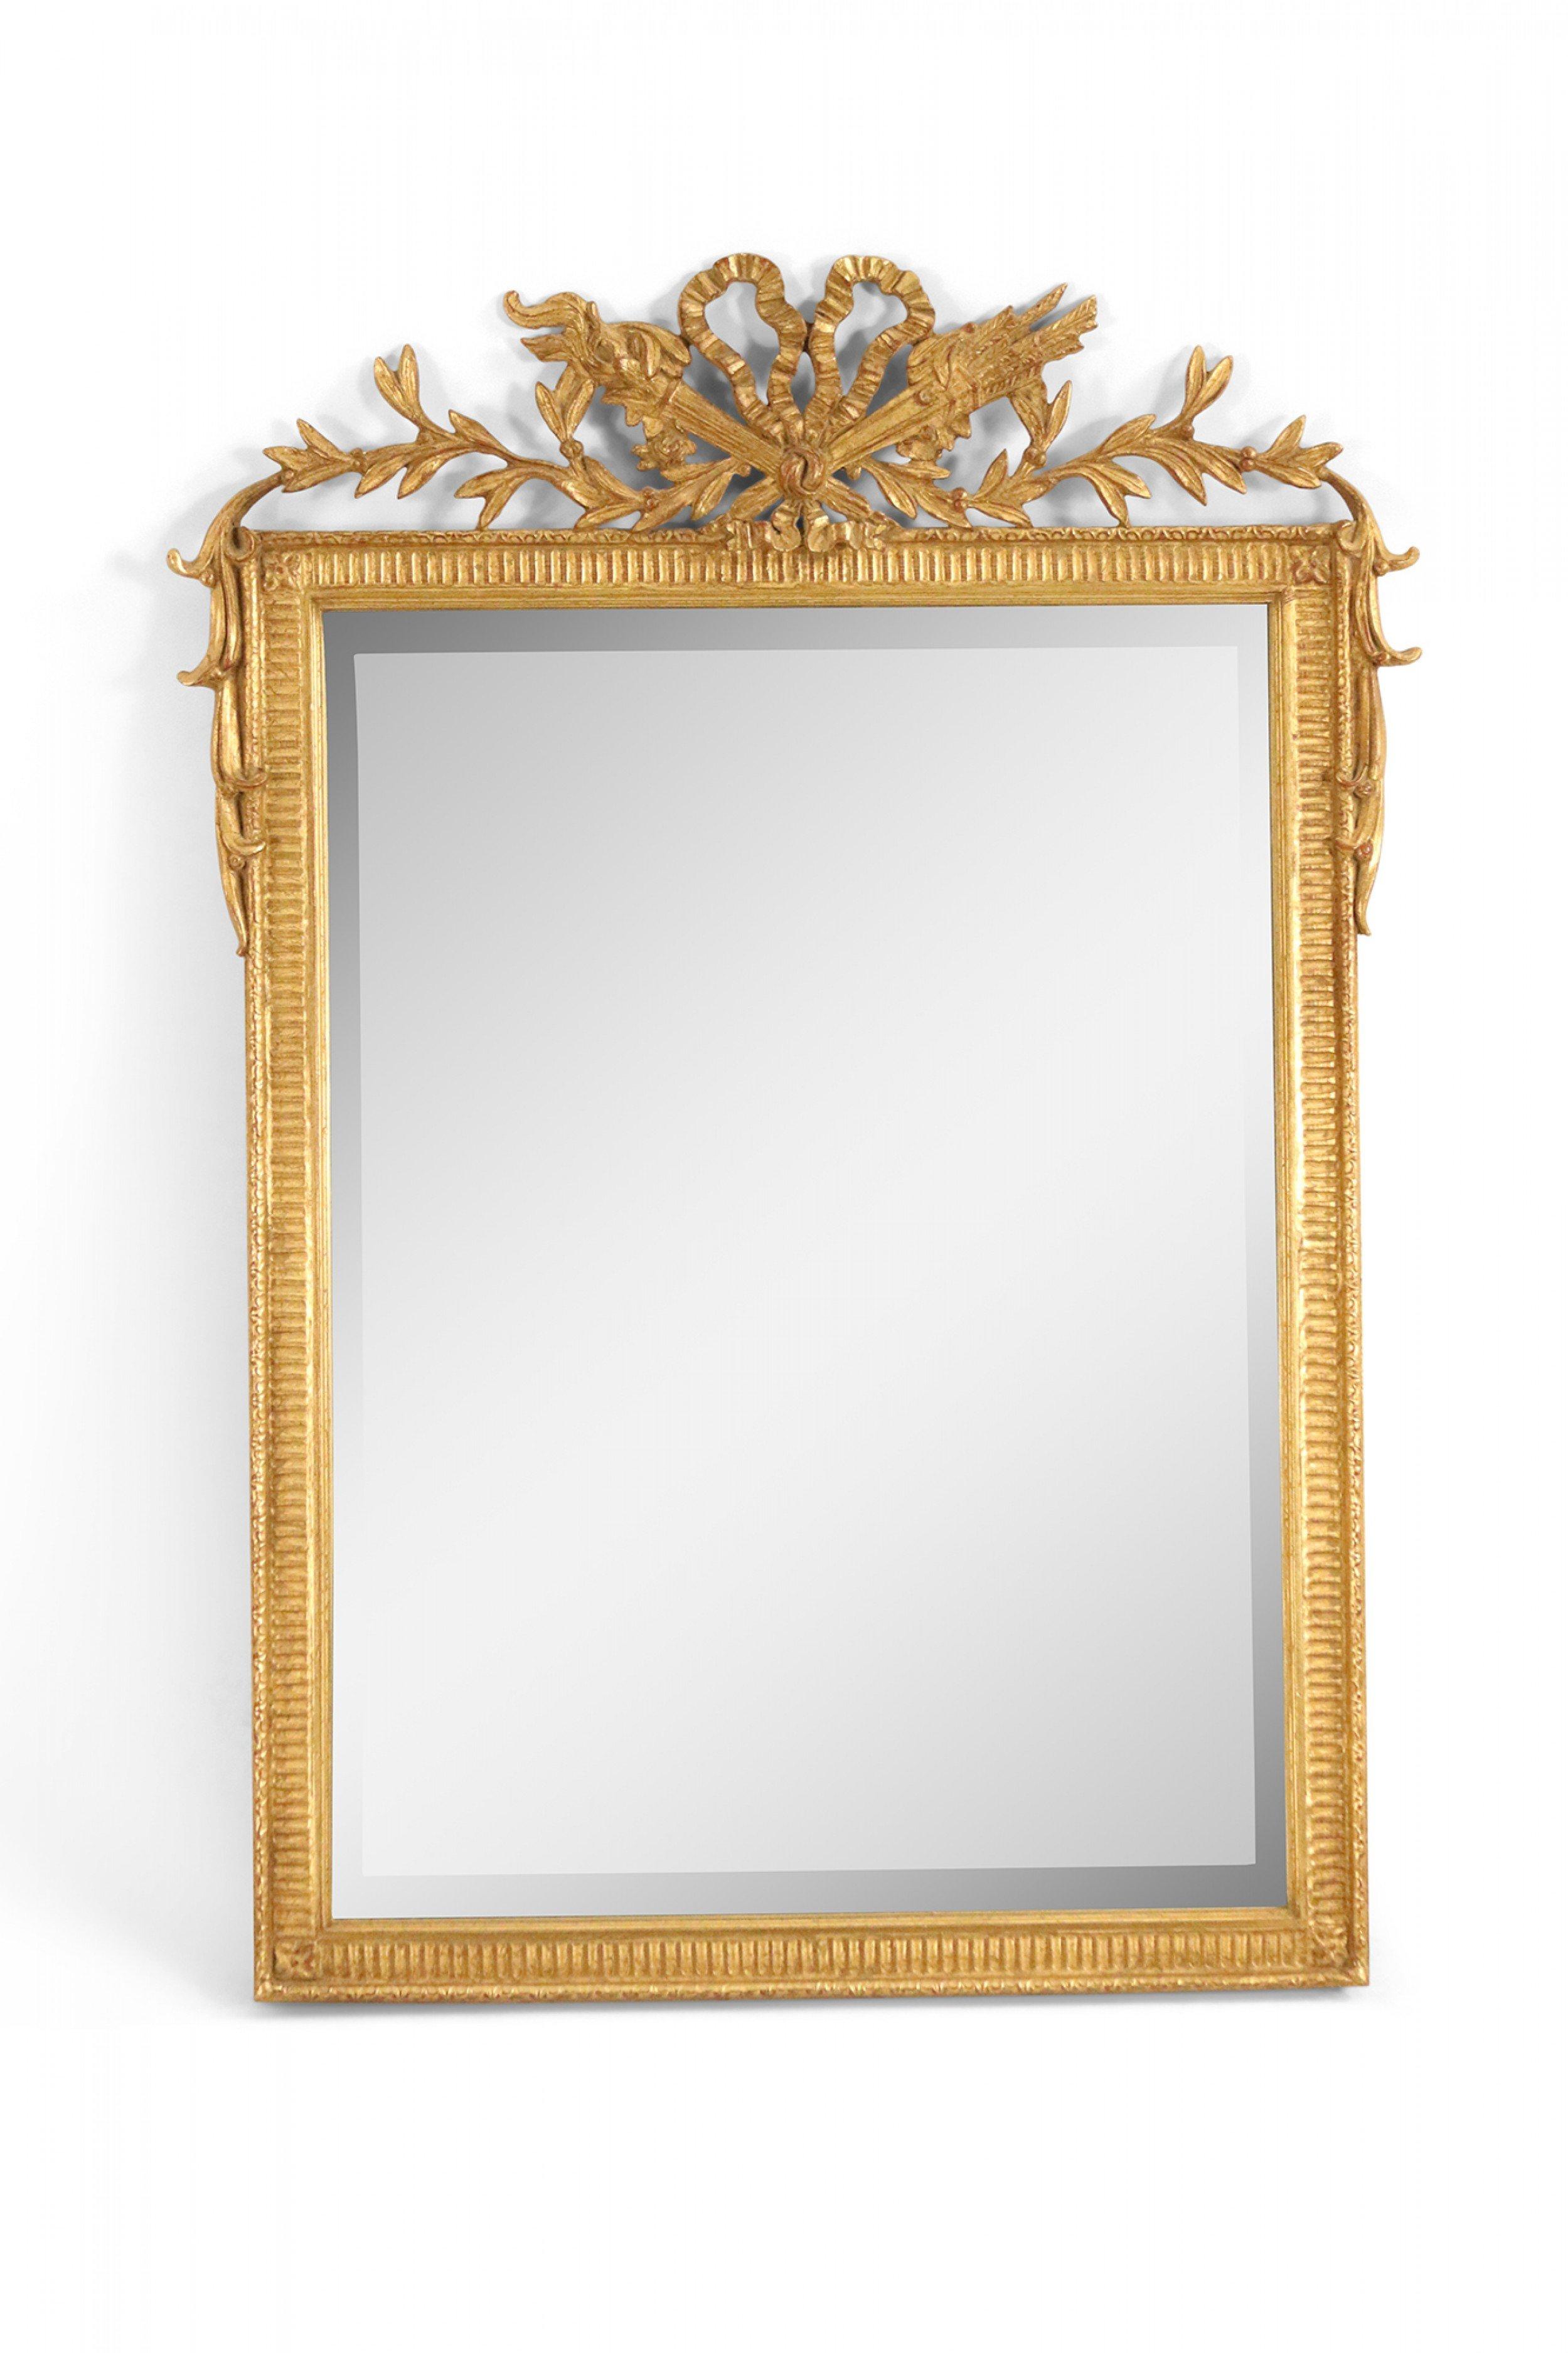 French Louis XVI-style giltwood rectangular wall mirror with a carved frame and a bow knot pediment top.